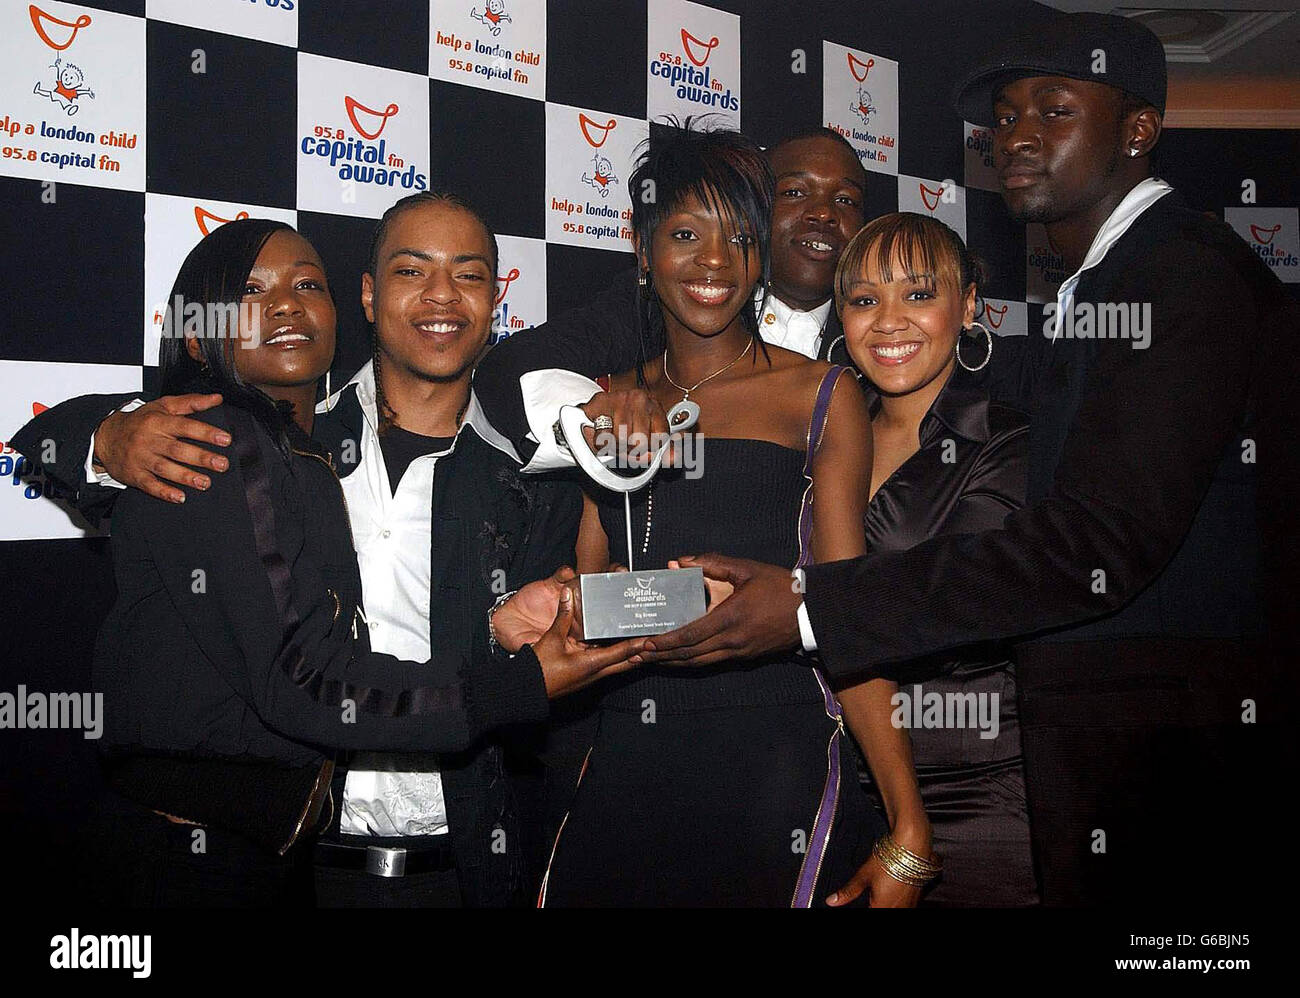 Big Brovaz with their Capital's Urban Soundtrack award, at the Capital FM Awards - for Help a London Child charity - at the Royal Lancester Hotel. Stock Photo